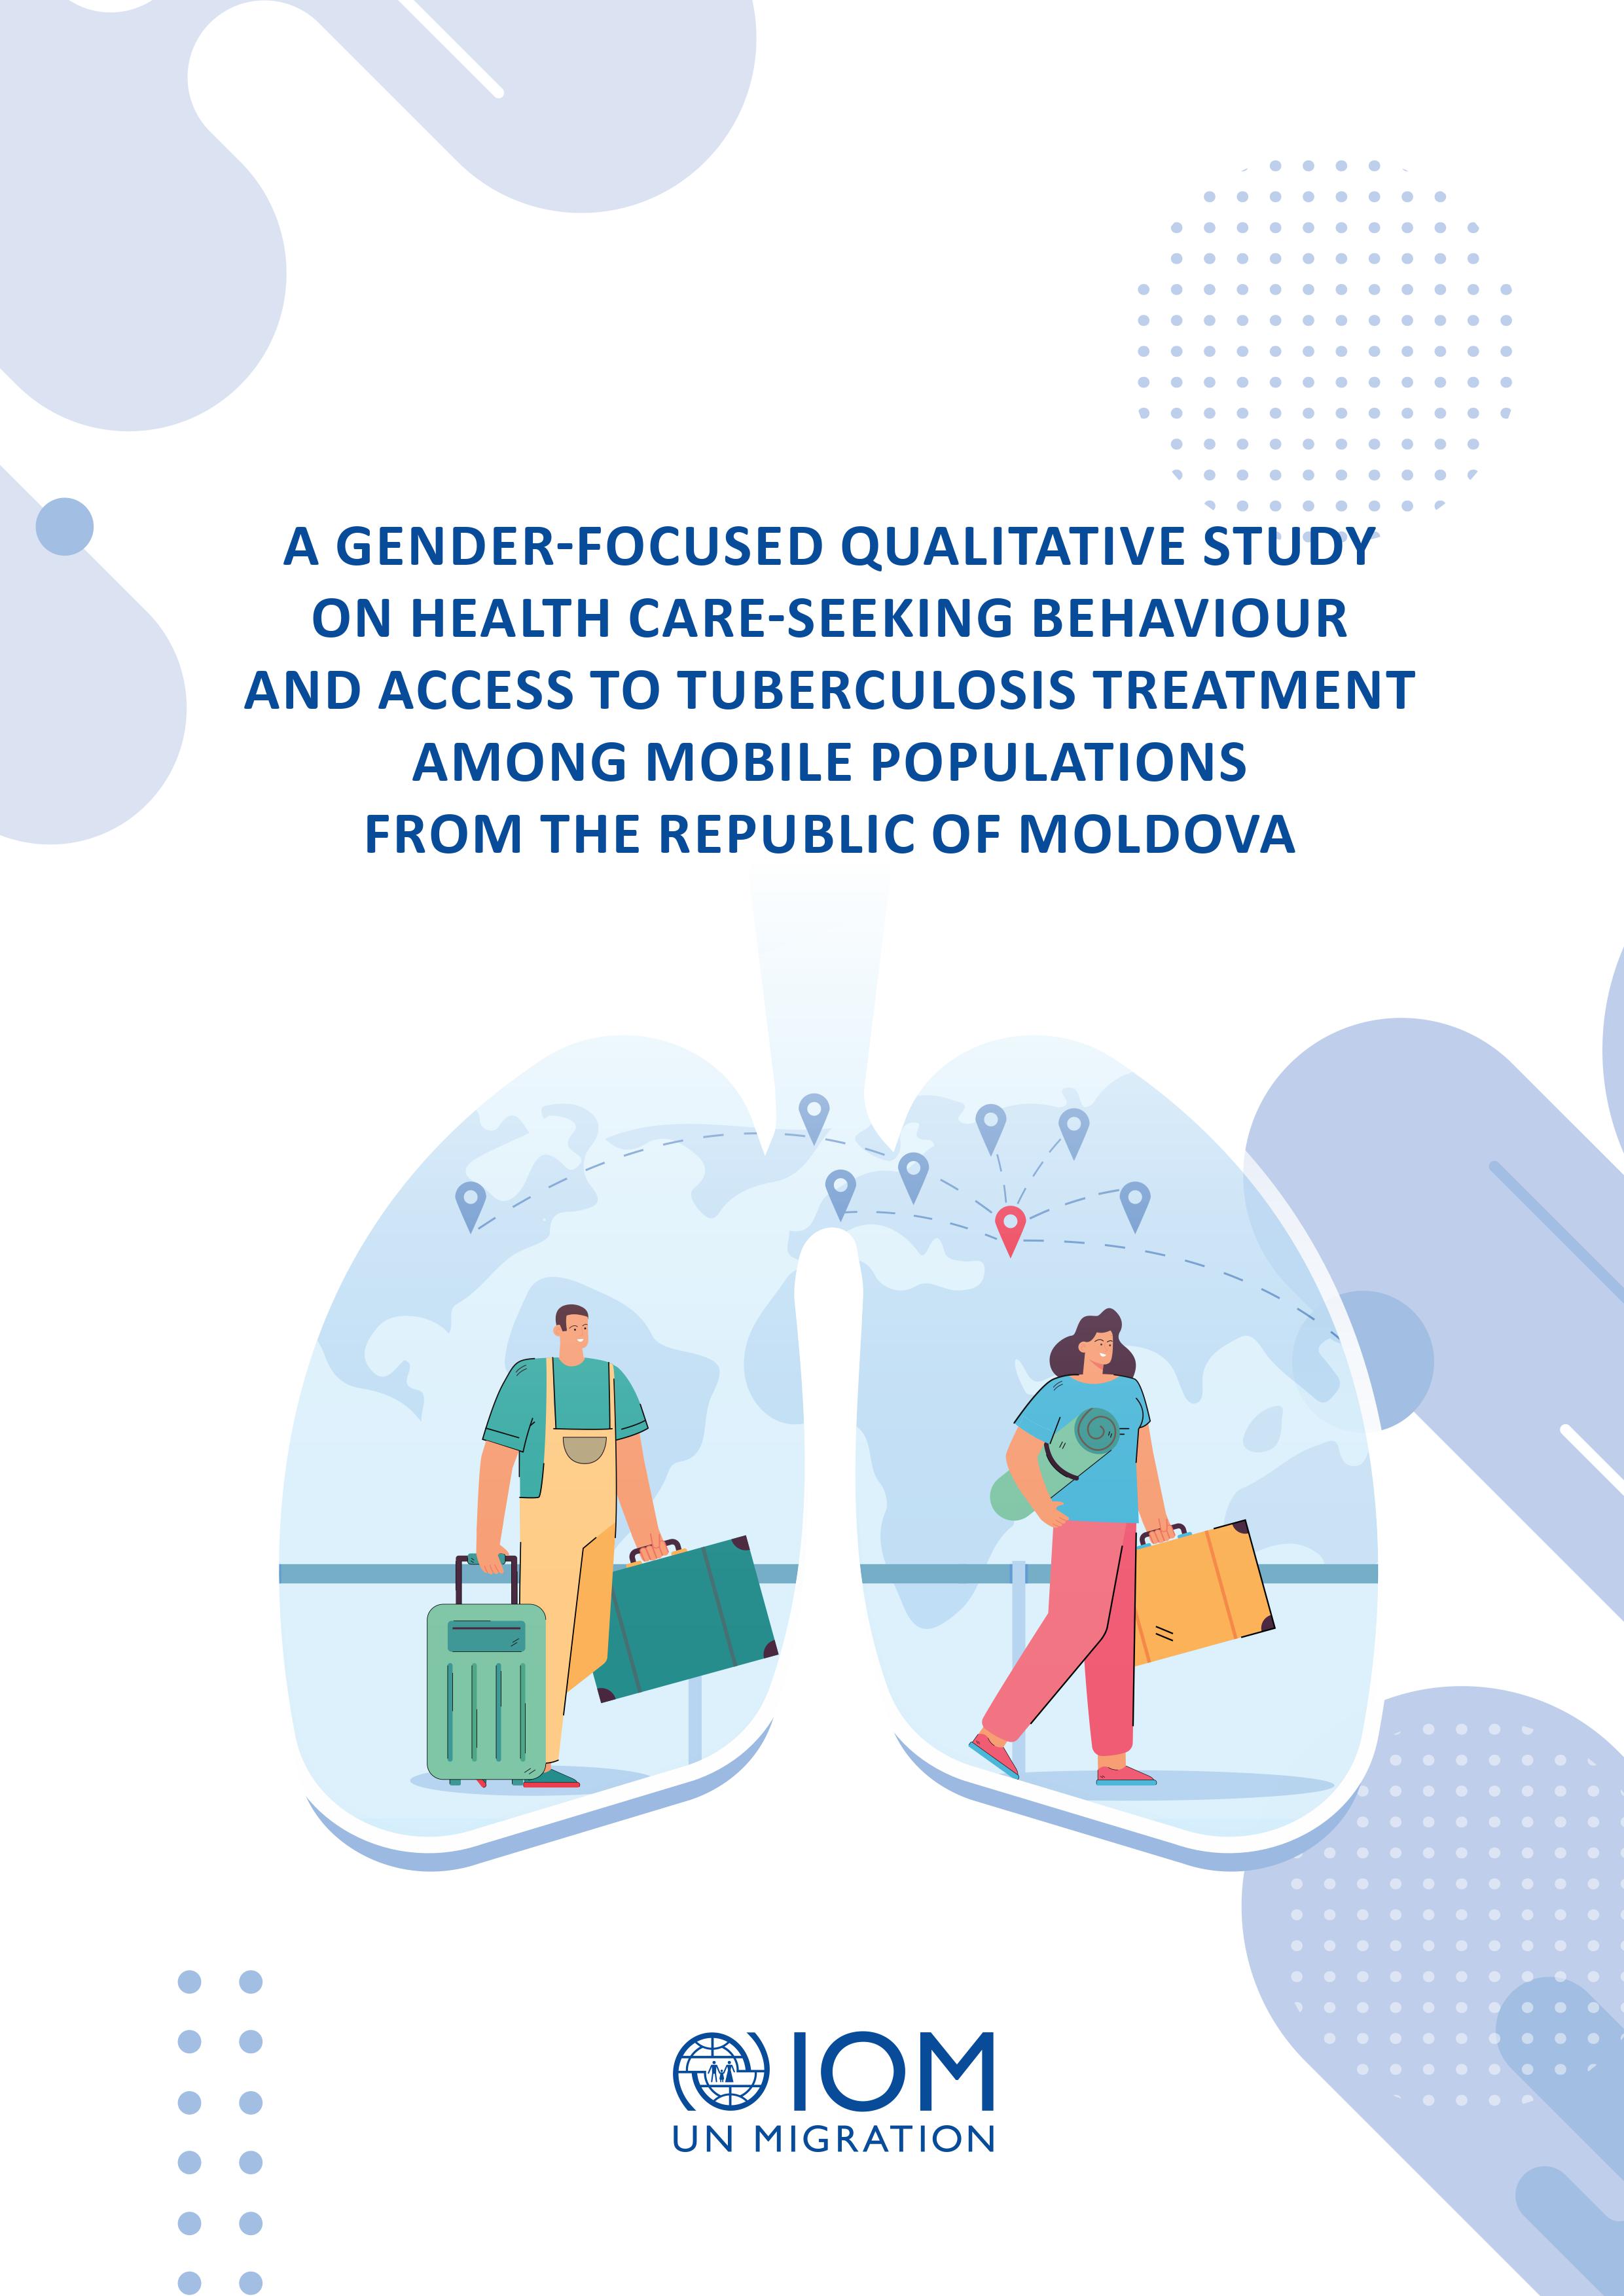 A gender-focused qualitative study on health care-seeking behaviour and access to tuberculosis treatment among mobile populations from the Republic of Moldova